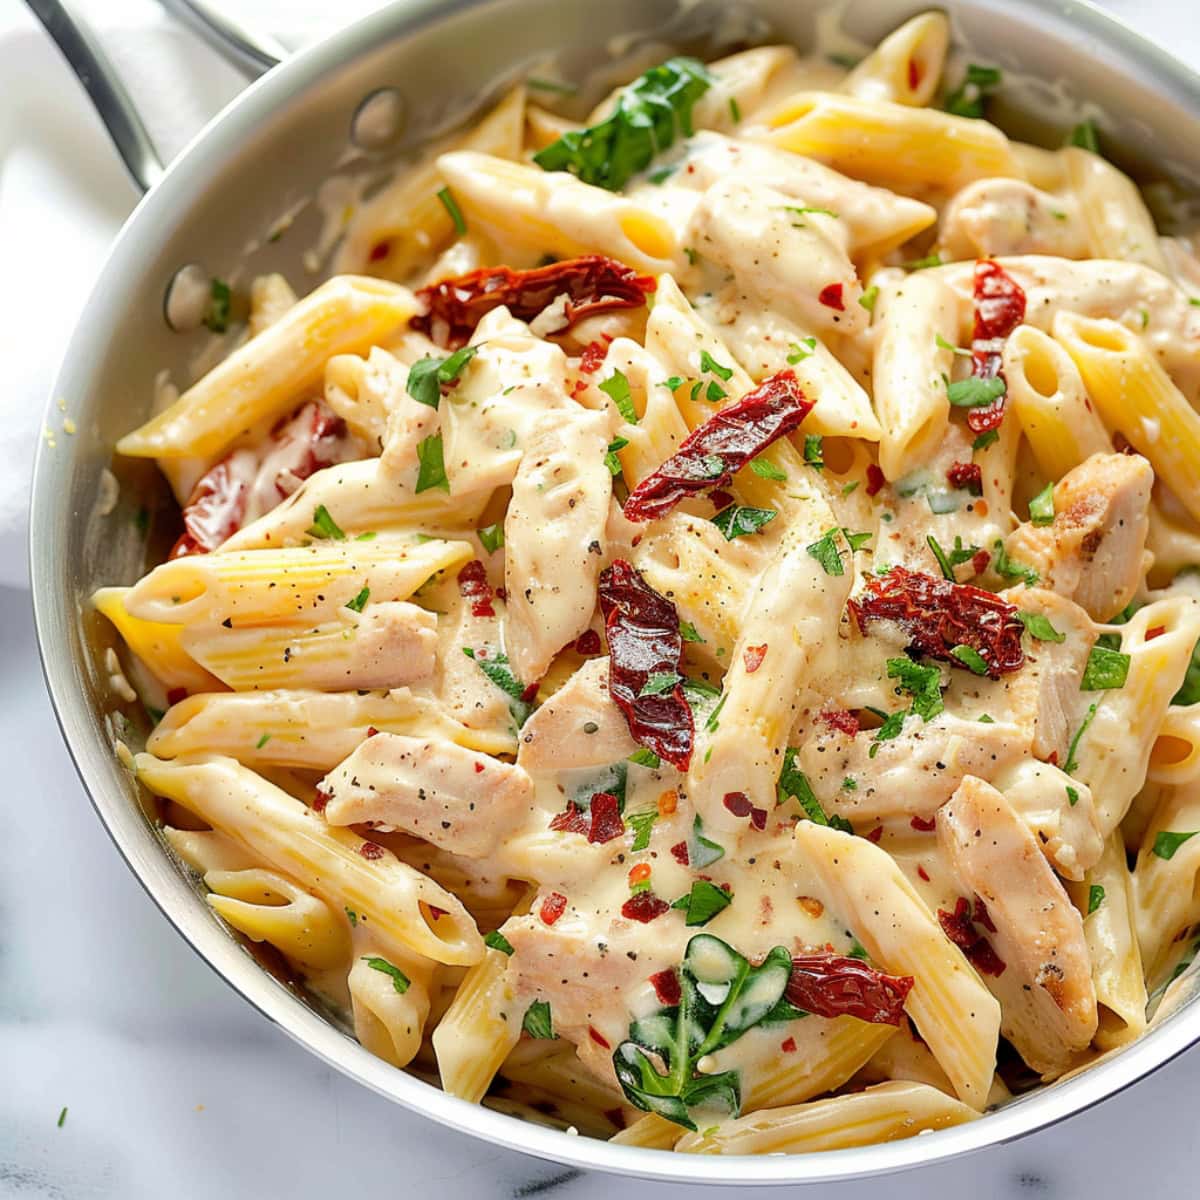 Penne pasta with creamy sauce, sun dried tomatoes in a skillet pan.